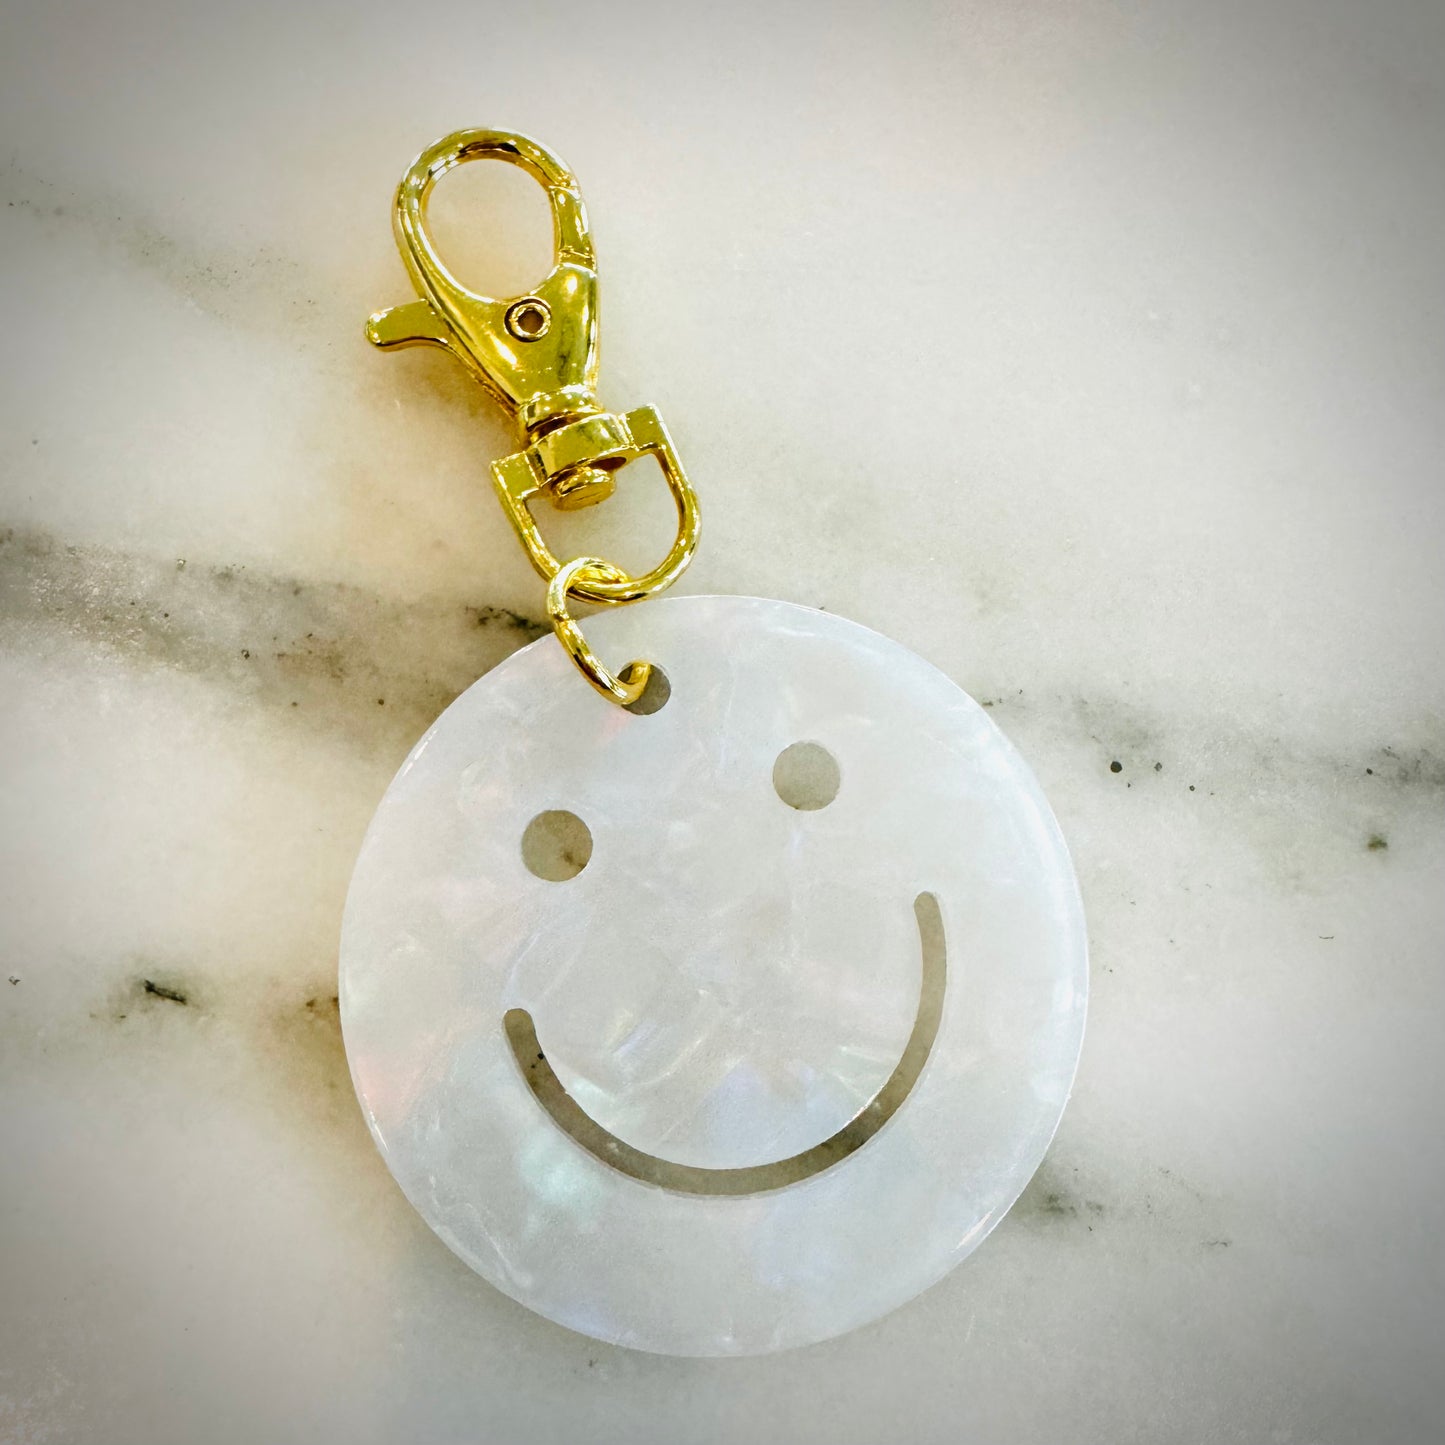 Smiley Face Key Chain